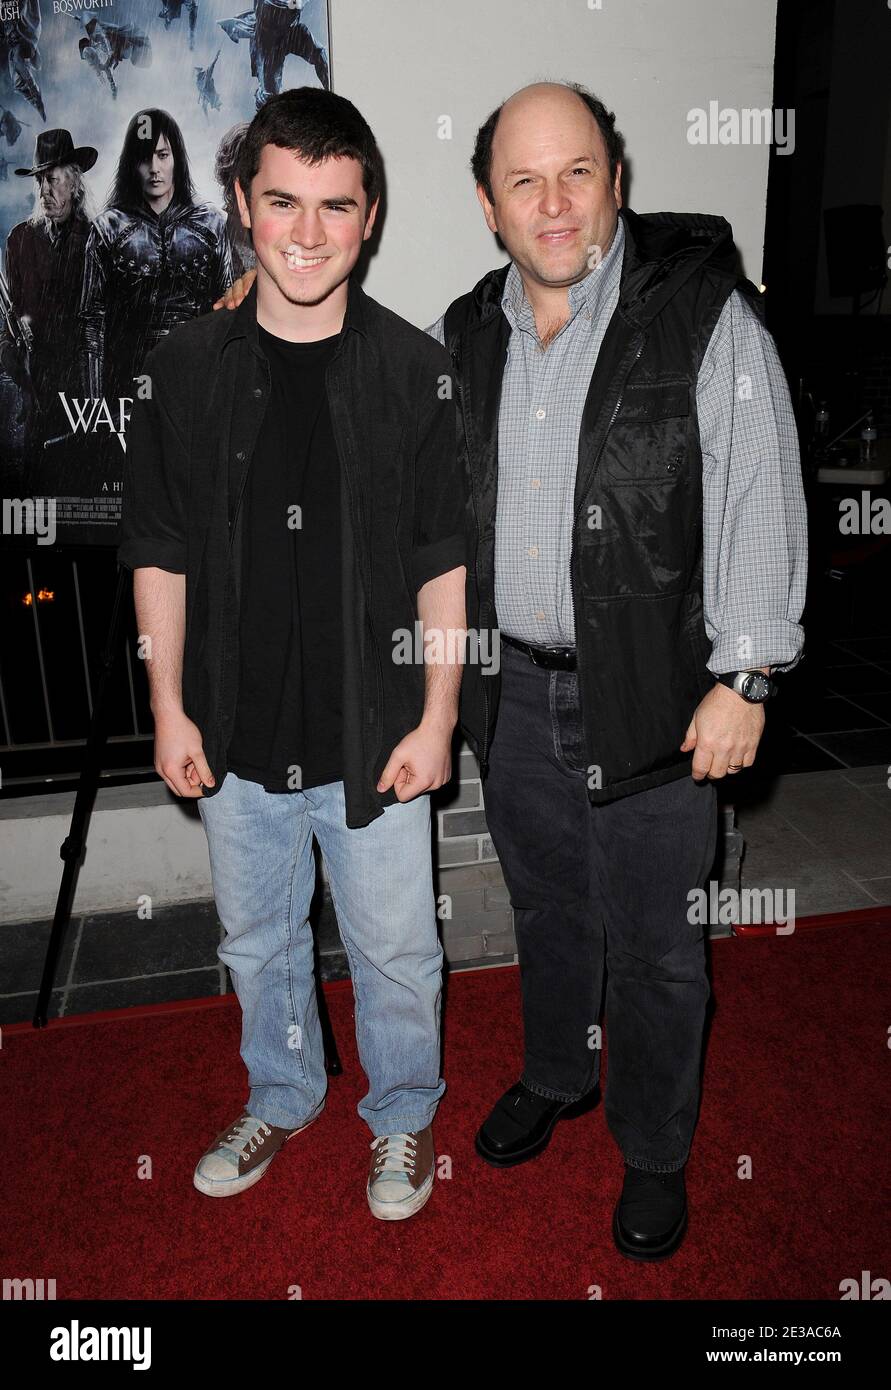 'Jason Alexander and son Noah attend ''The Warrior's Way'' screening at CGV Cinemas on November 19, 2010 in Los Angeles, California. Photo by Lionel Hahn/ABACAPRESS.COM' Stock Photo